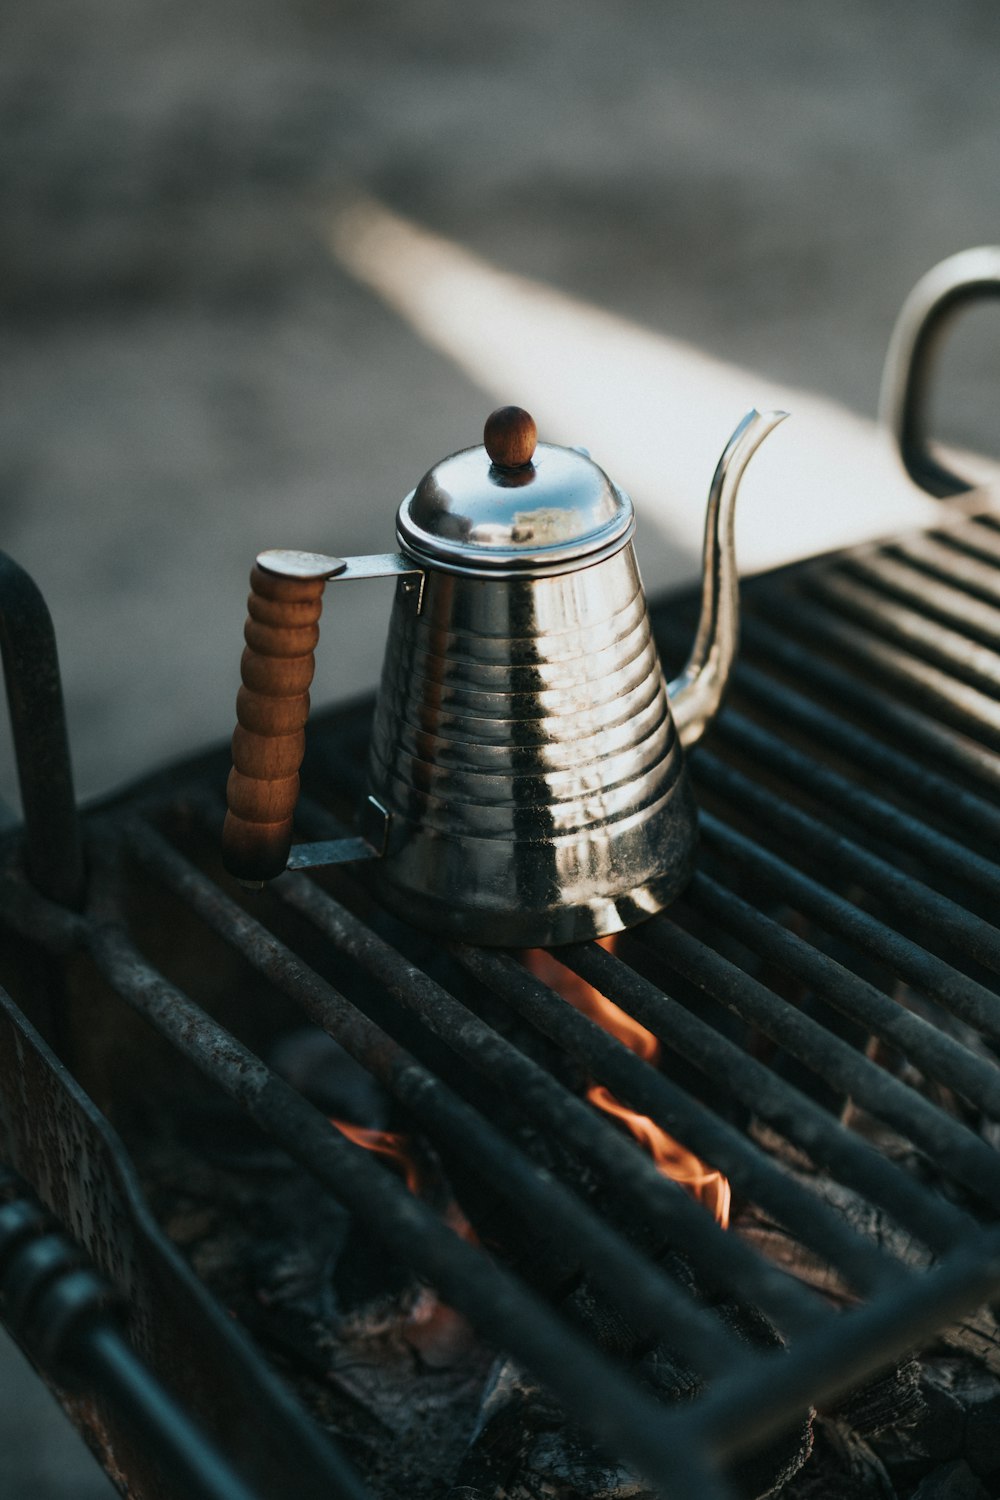 stainless steel teapot on black metal grill